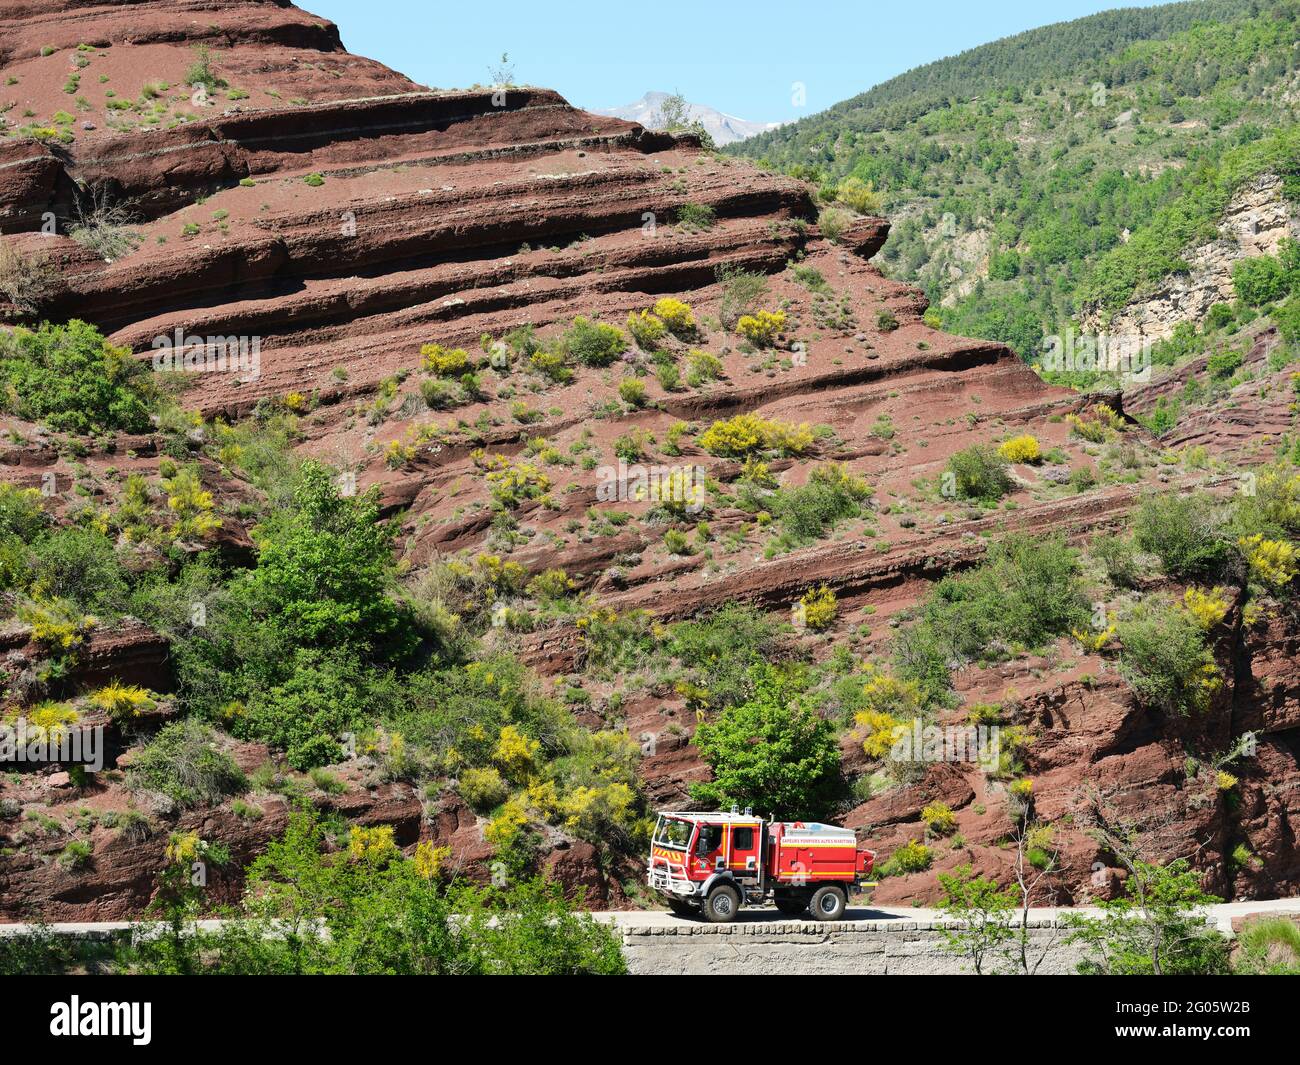 All-terrain firetruck with a background of red pelite and flowering brooms. Gorges de Daluis, Guillaumes, Alpes-Maritimes, France. Stock Photo